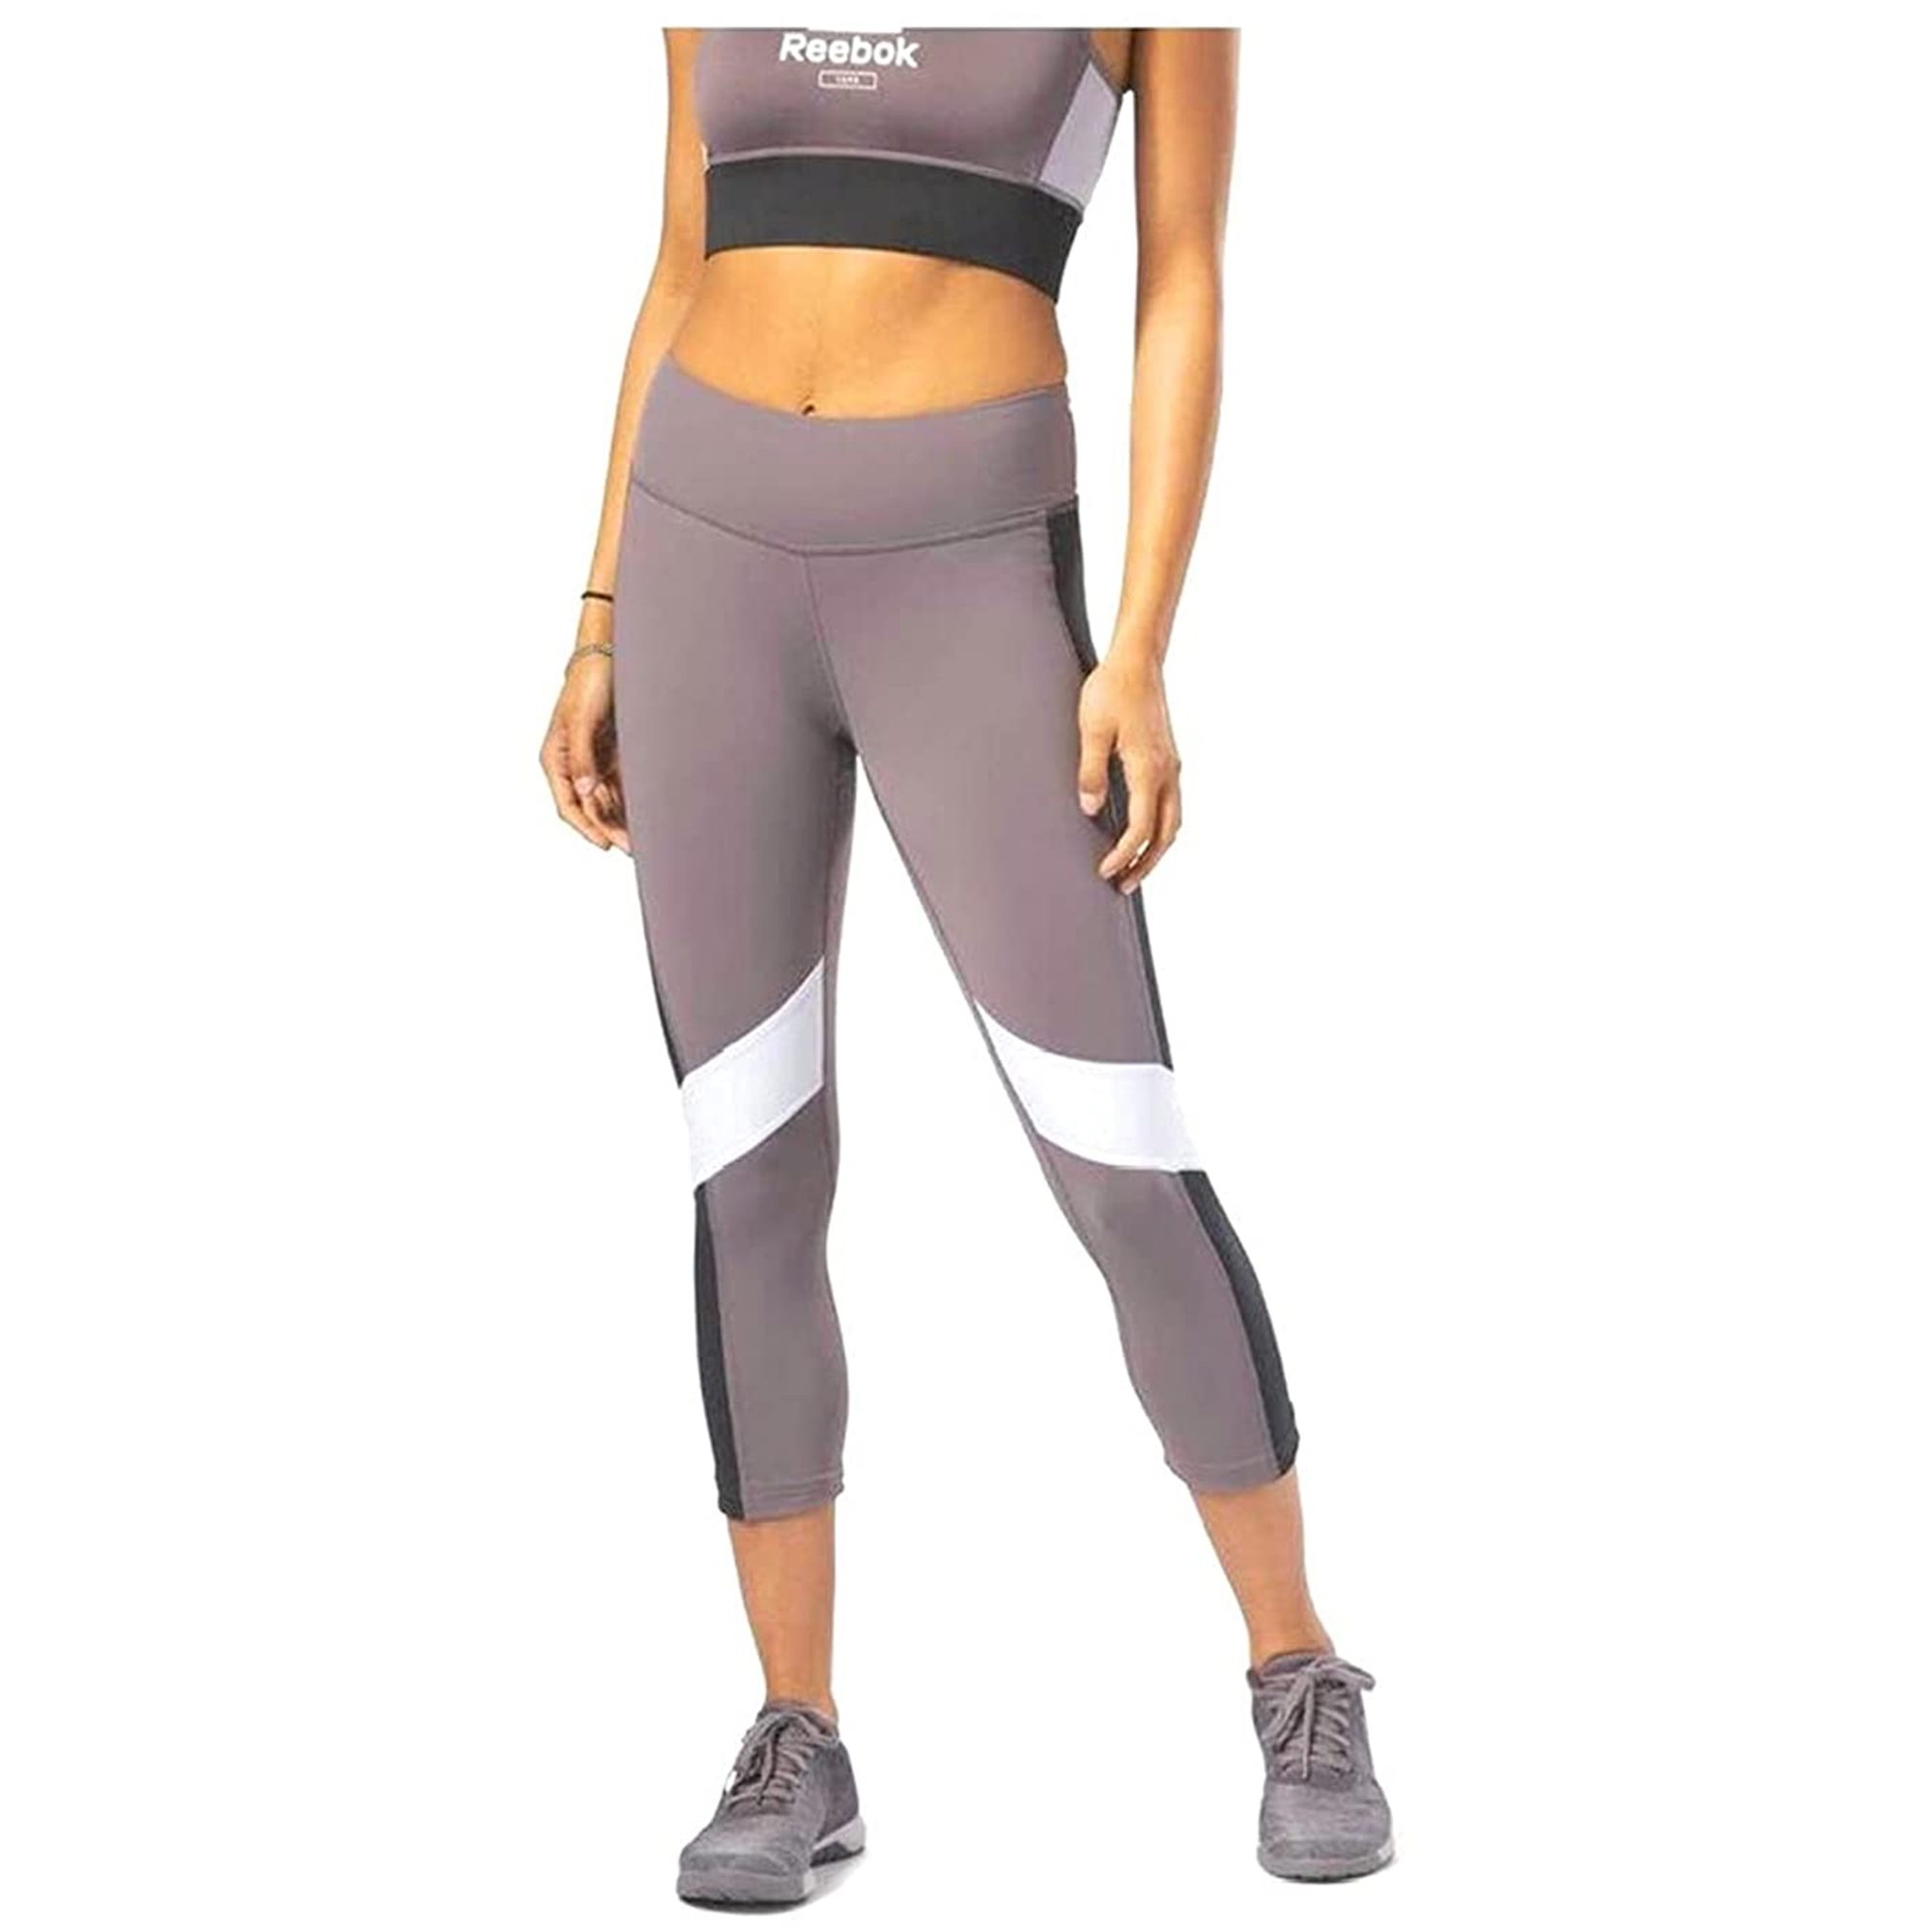 Reebok Womens One Series Compression Athletic Pants